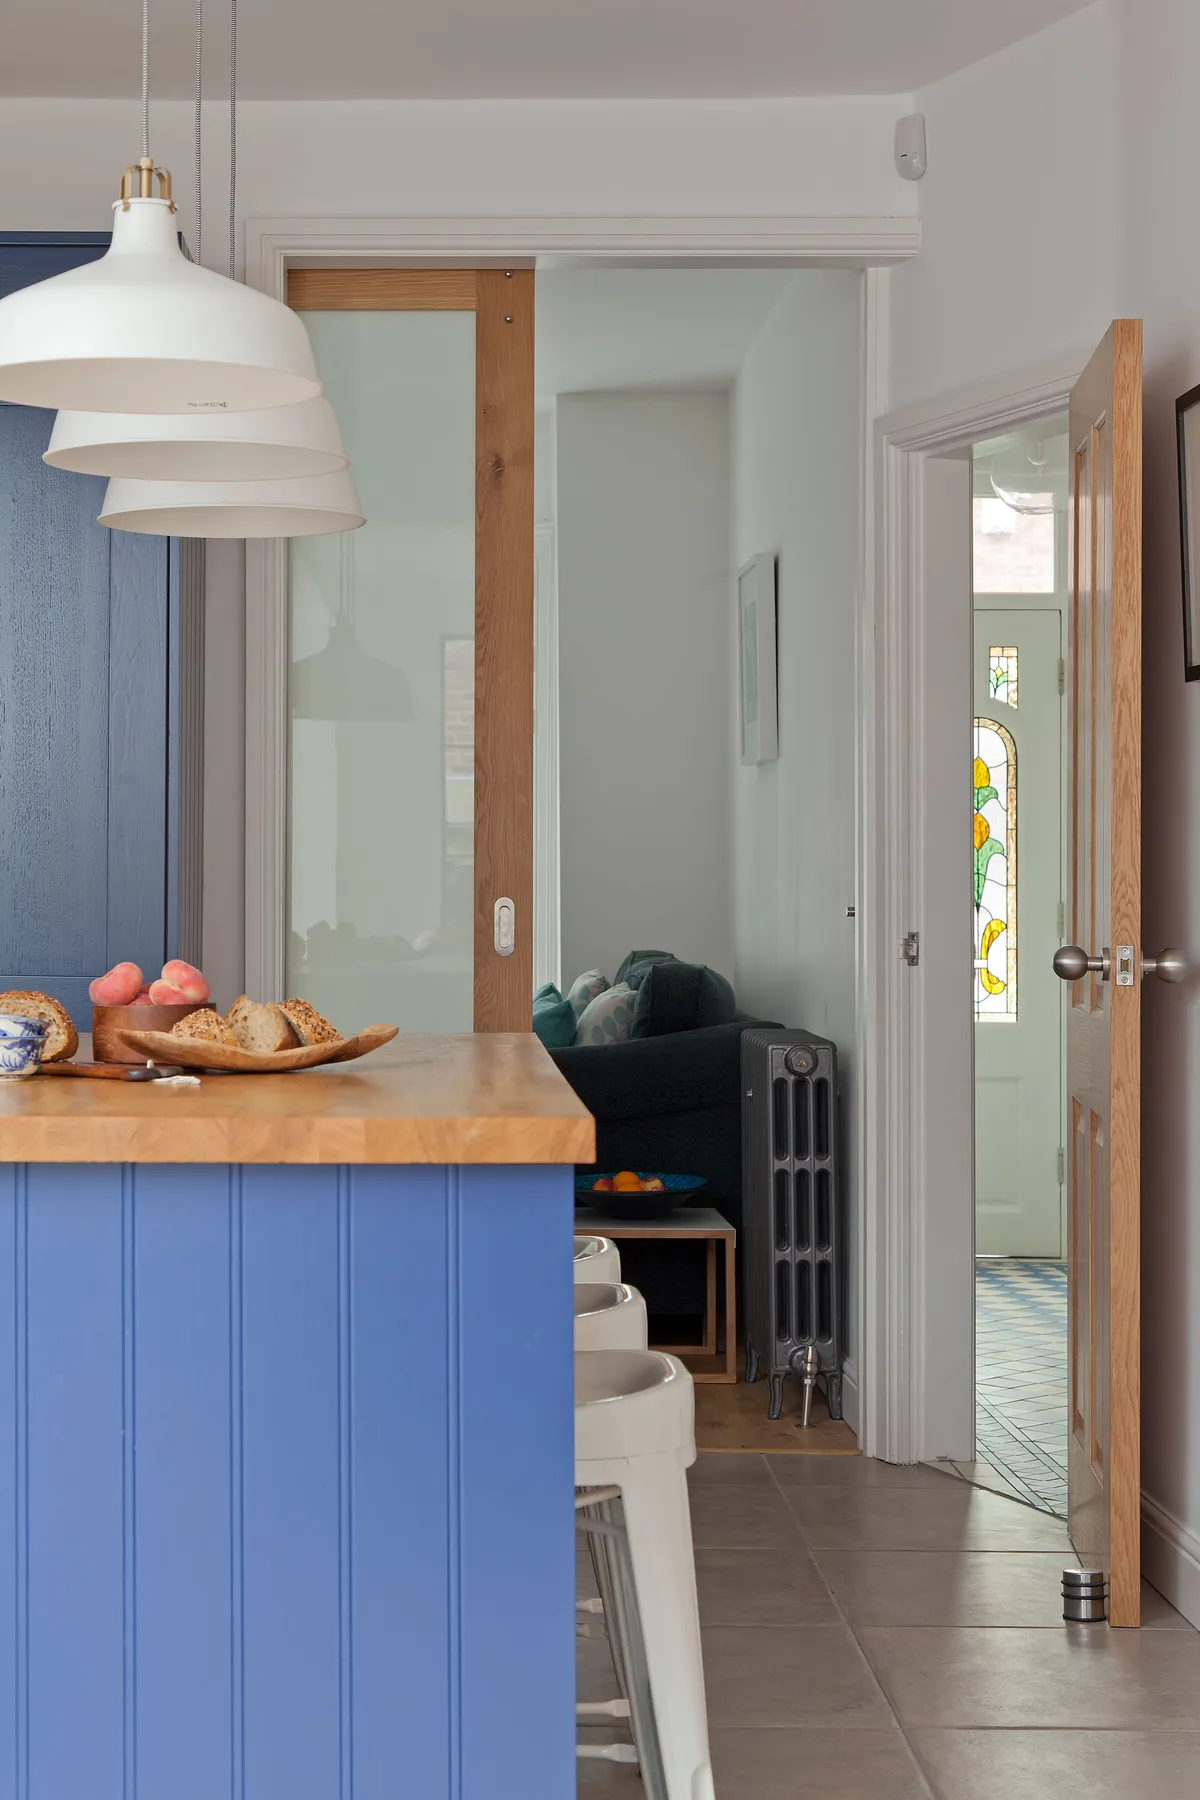 Deep blue units add a dramatic dash of colour against the dazzling white walls